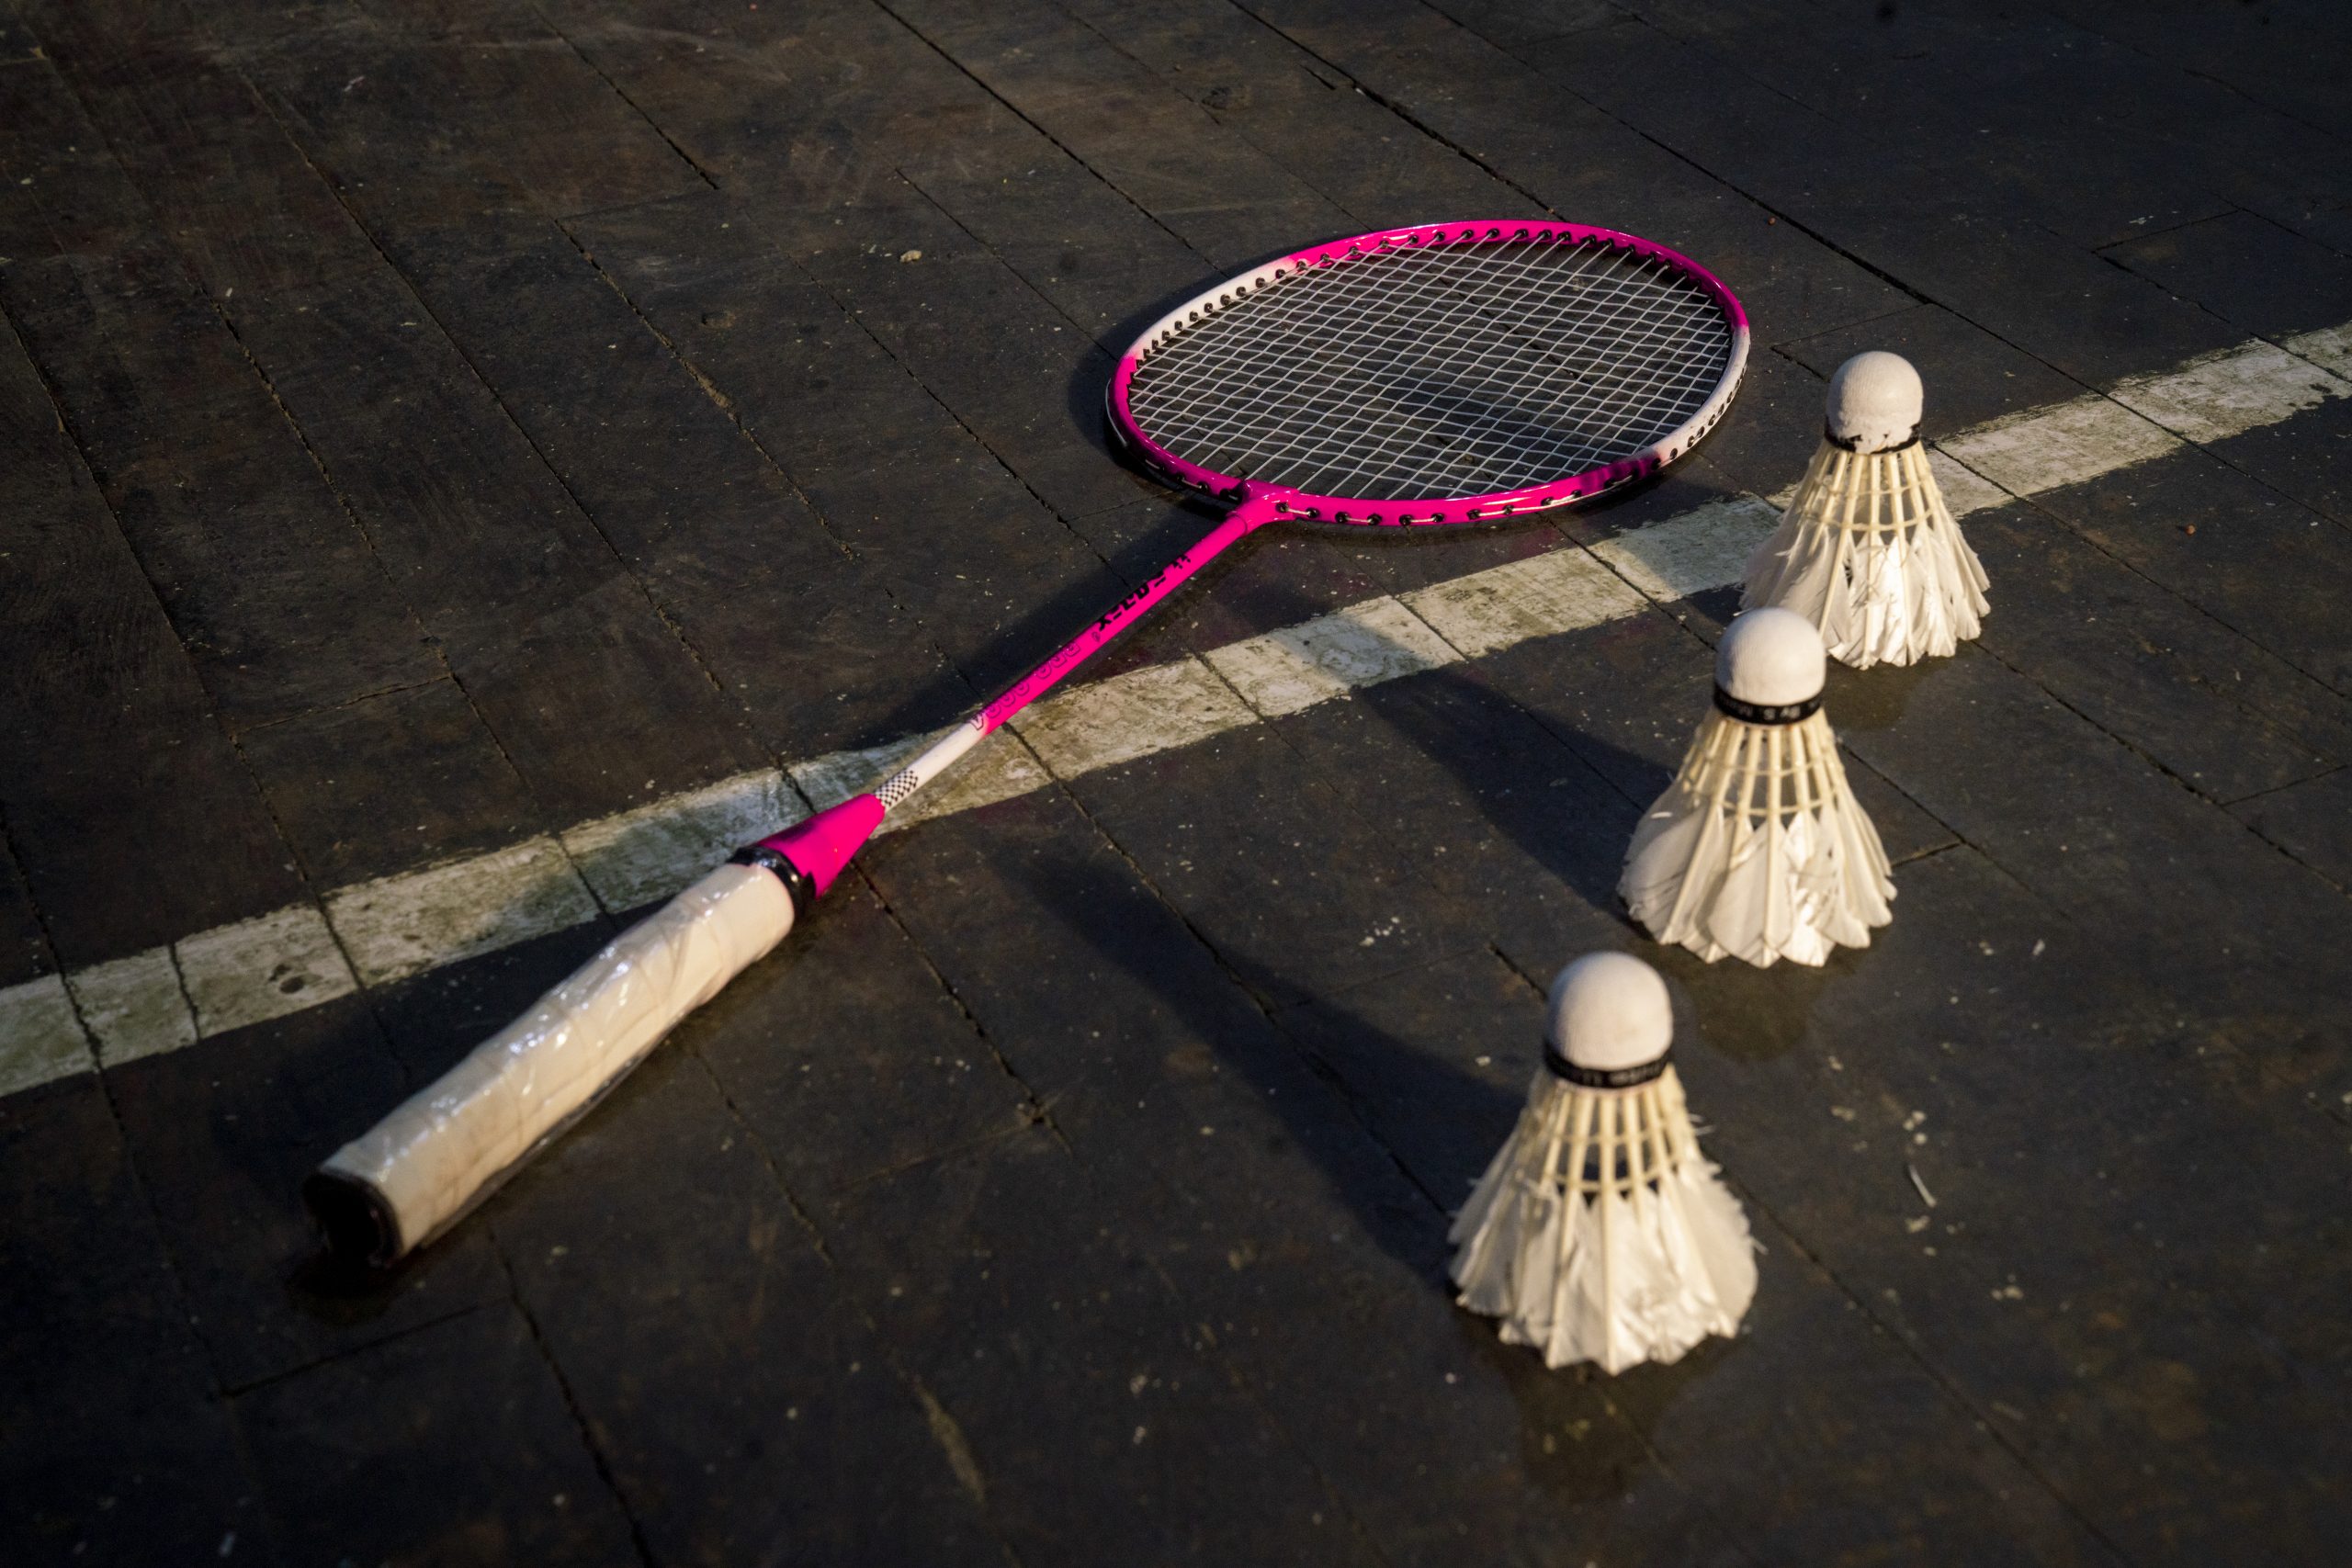 Badminton racket and shuttlecock on the ground